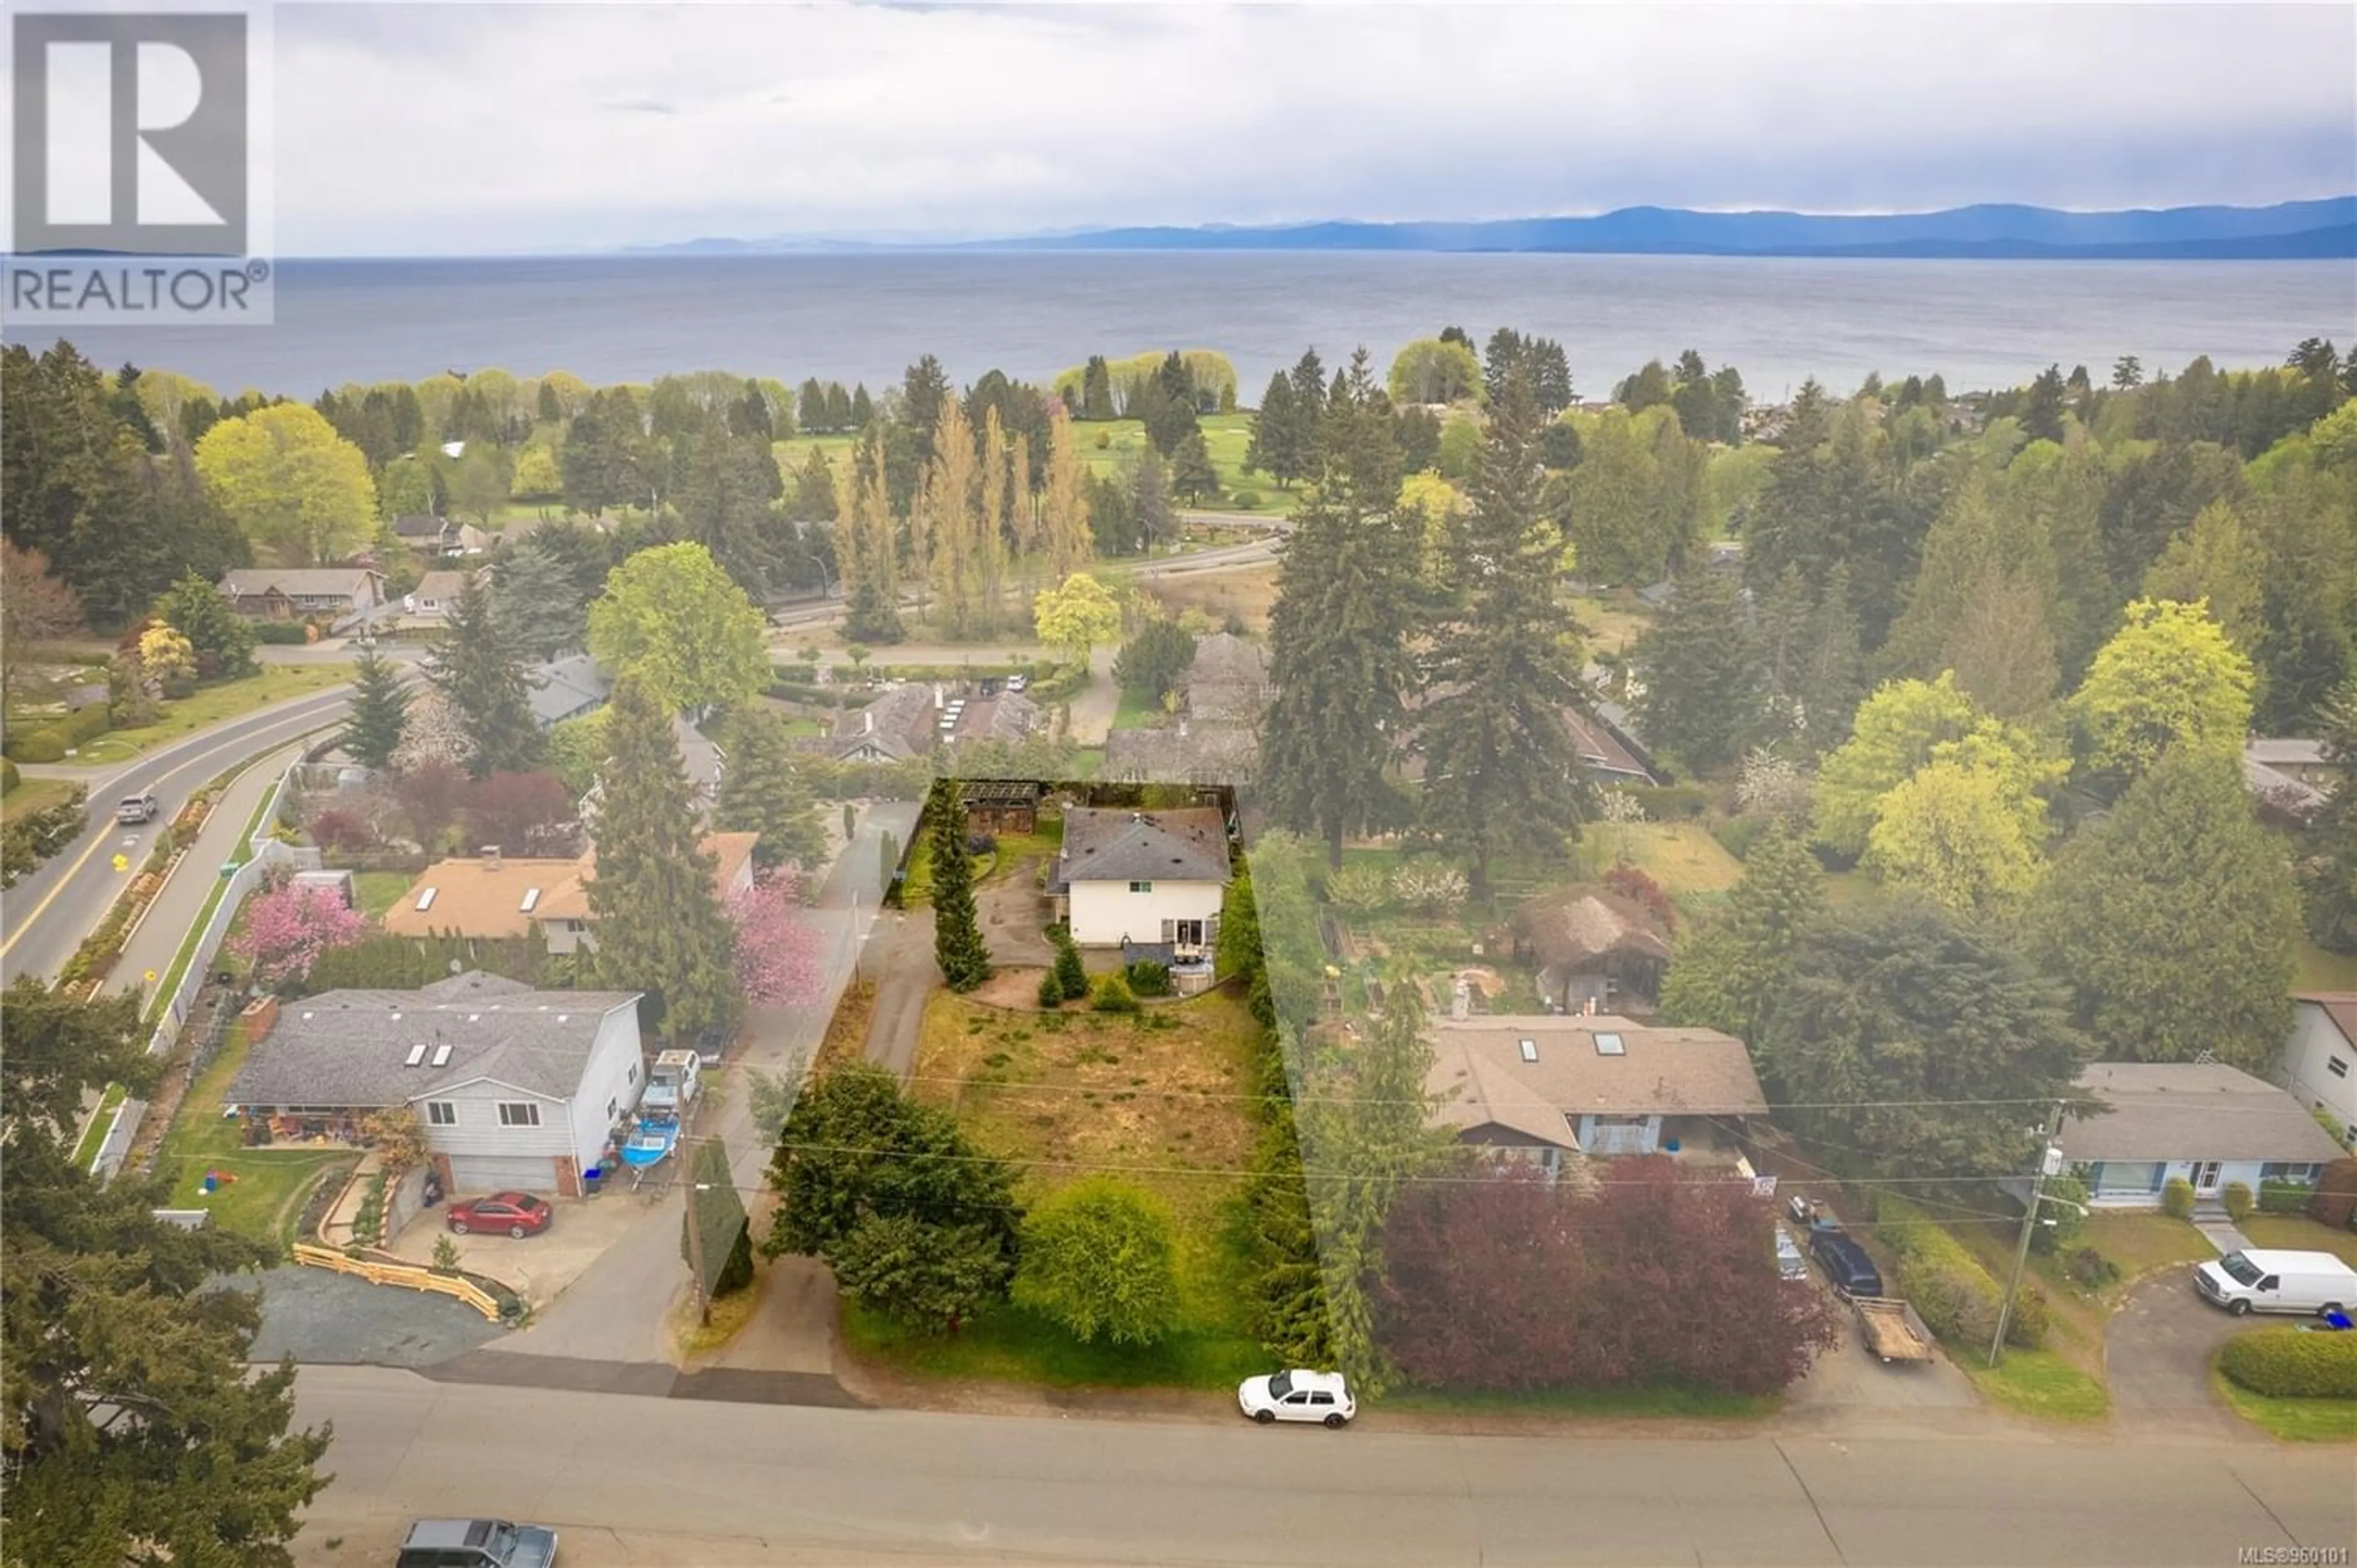 Lakeview for 115 117 Sunningdale Rd, Qualicum Beach British Columbia V9K1L1